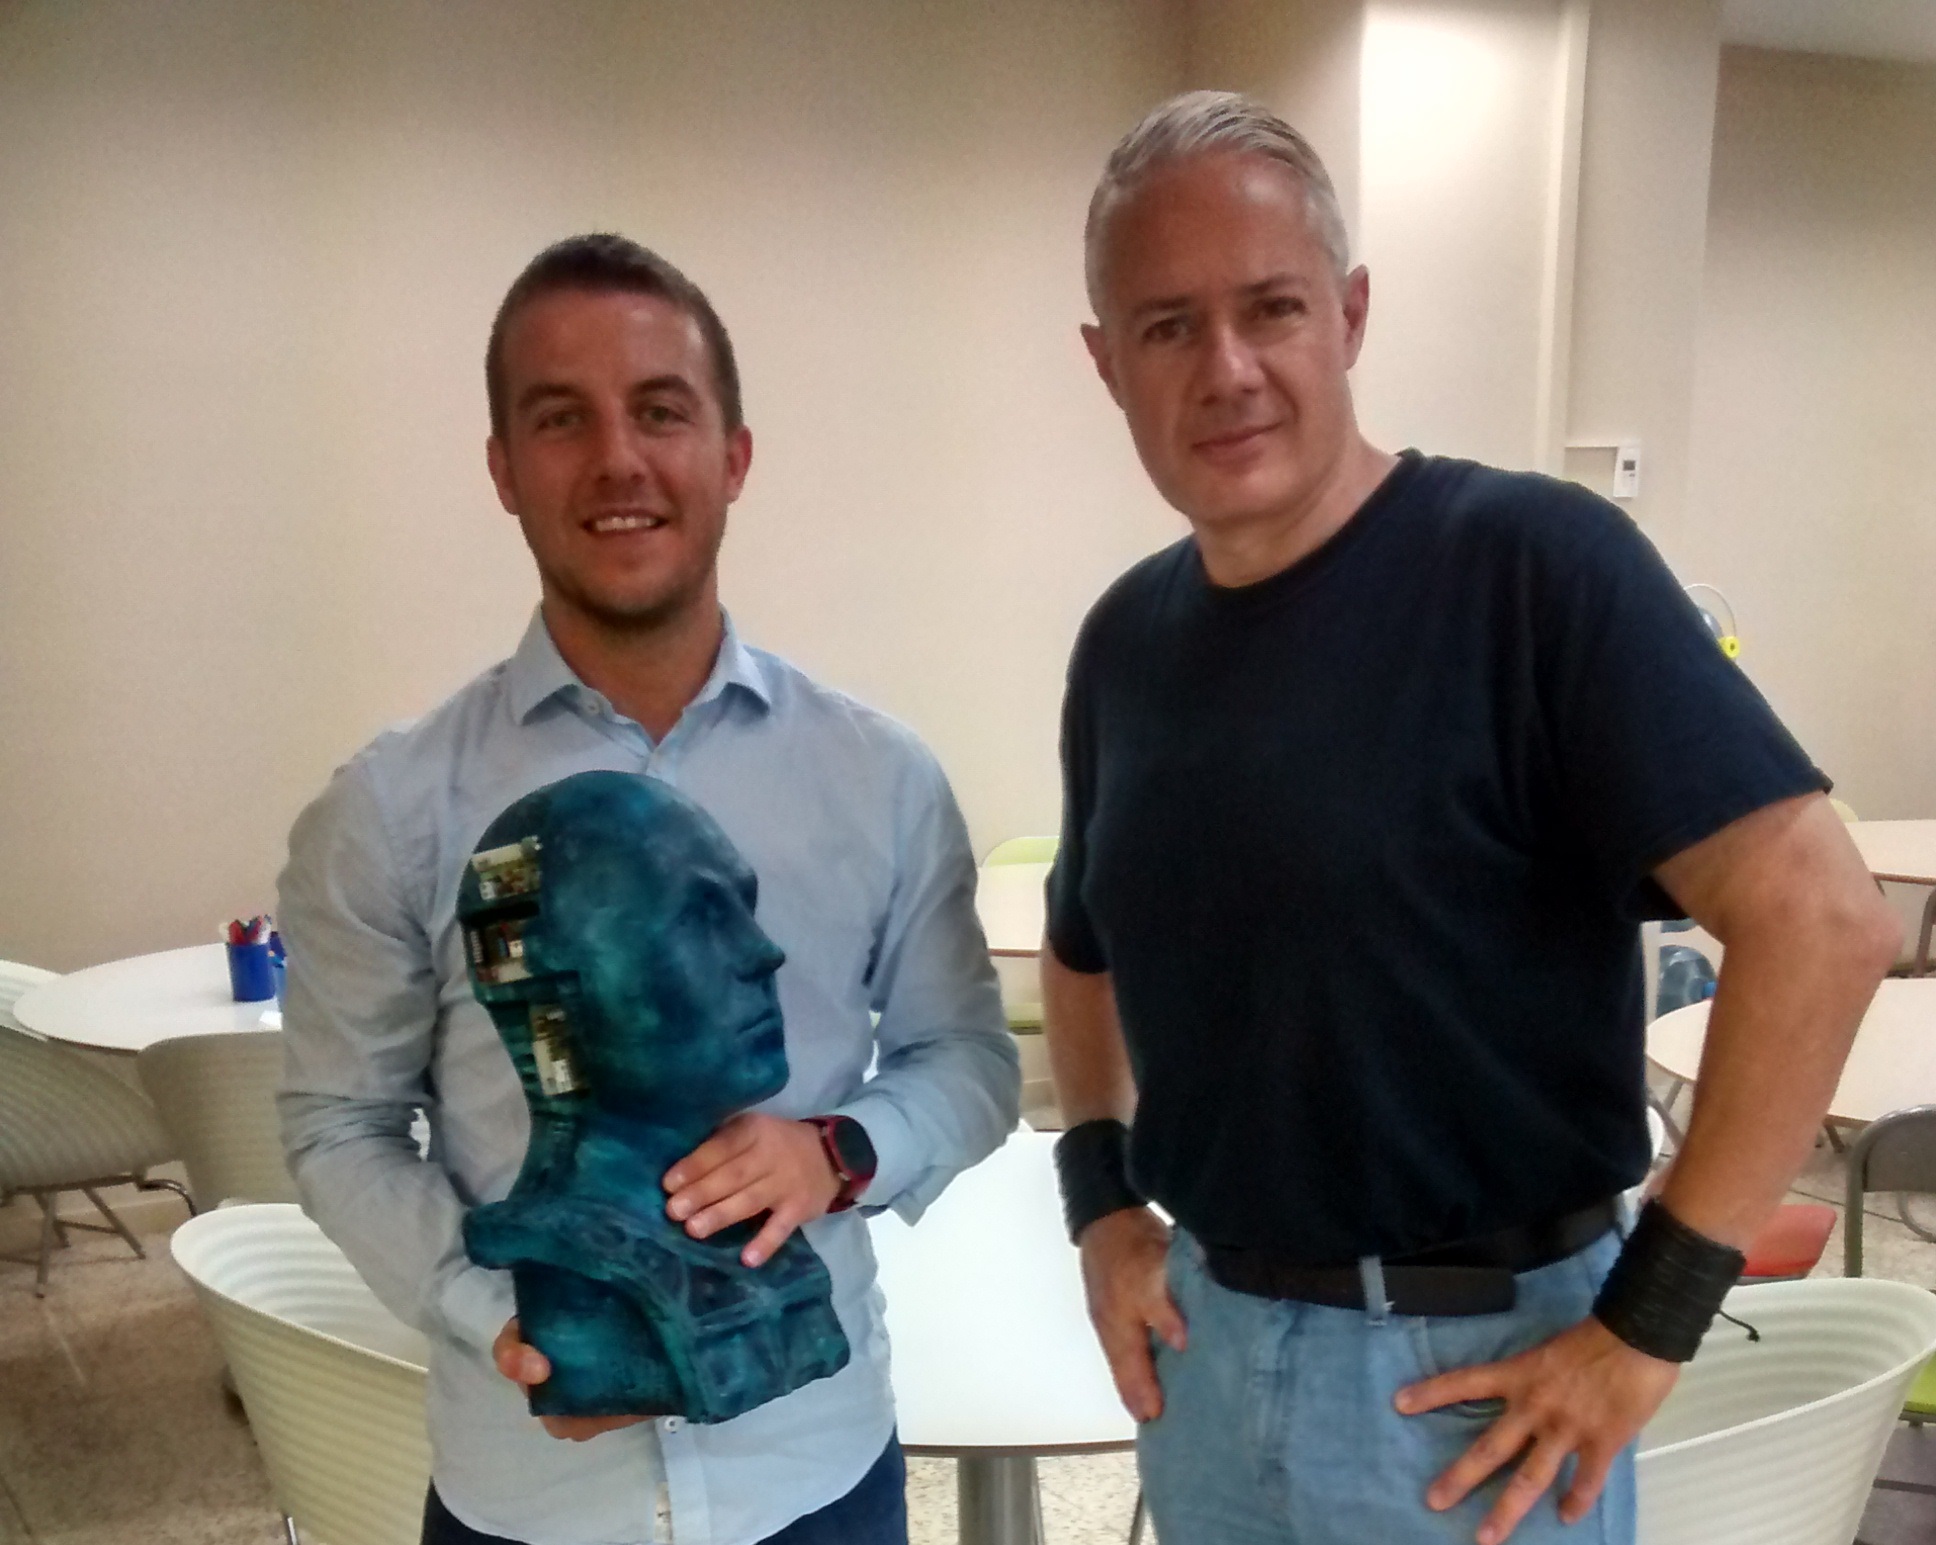 Art and robotics: CTO Luca Marchionni with the artist Rogelio Fernández.